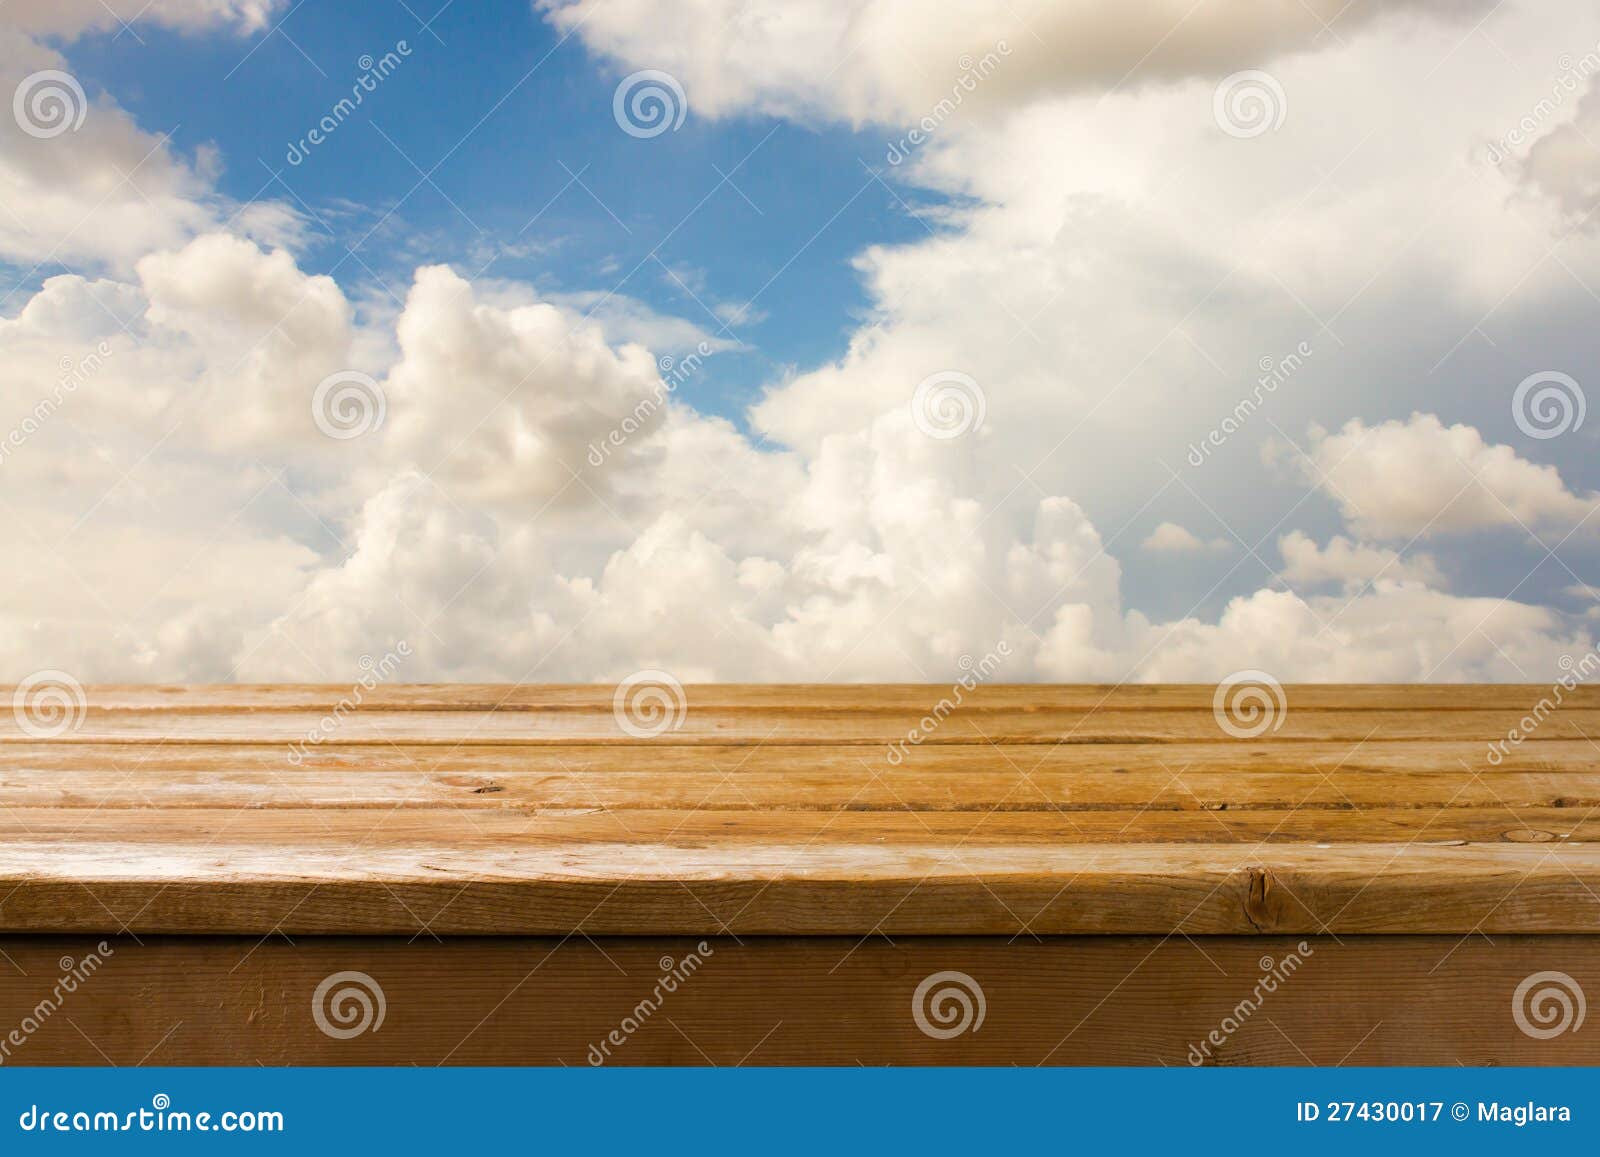 Wooden table and blue sky. Background with wooden table and blue cloudy sky